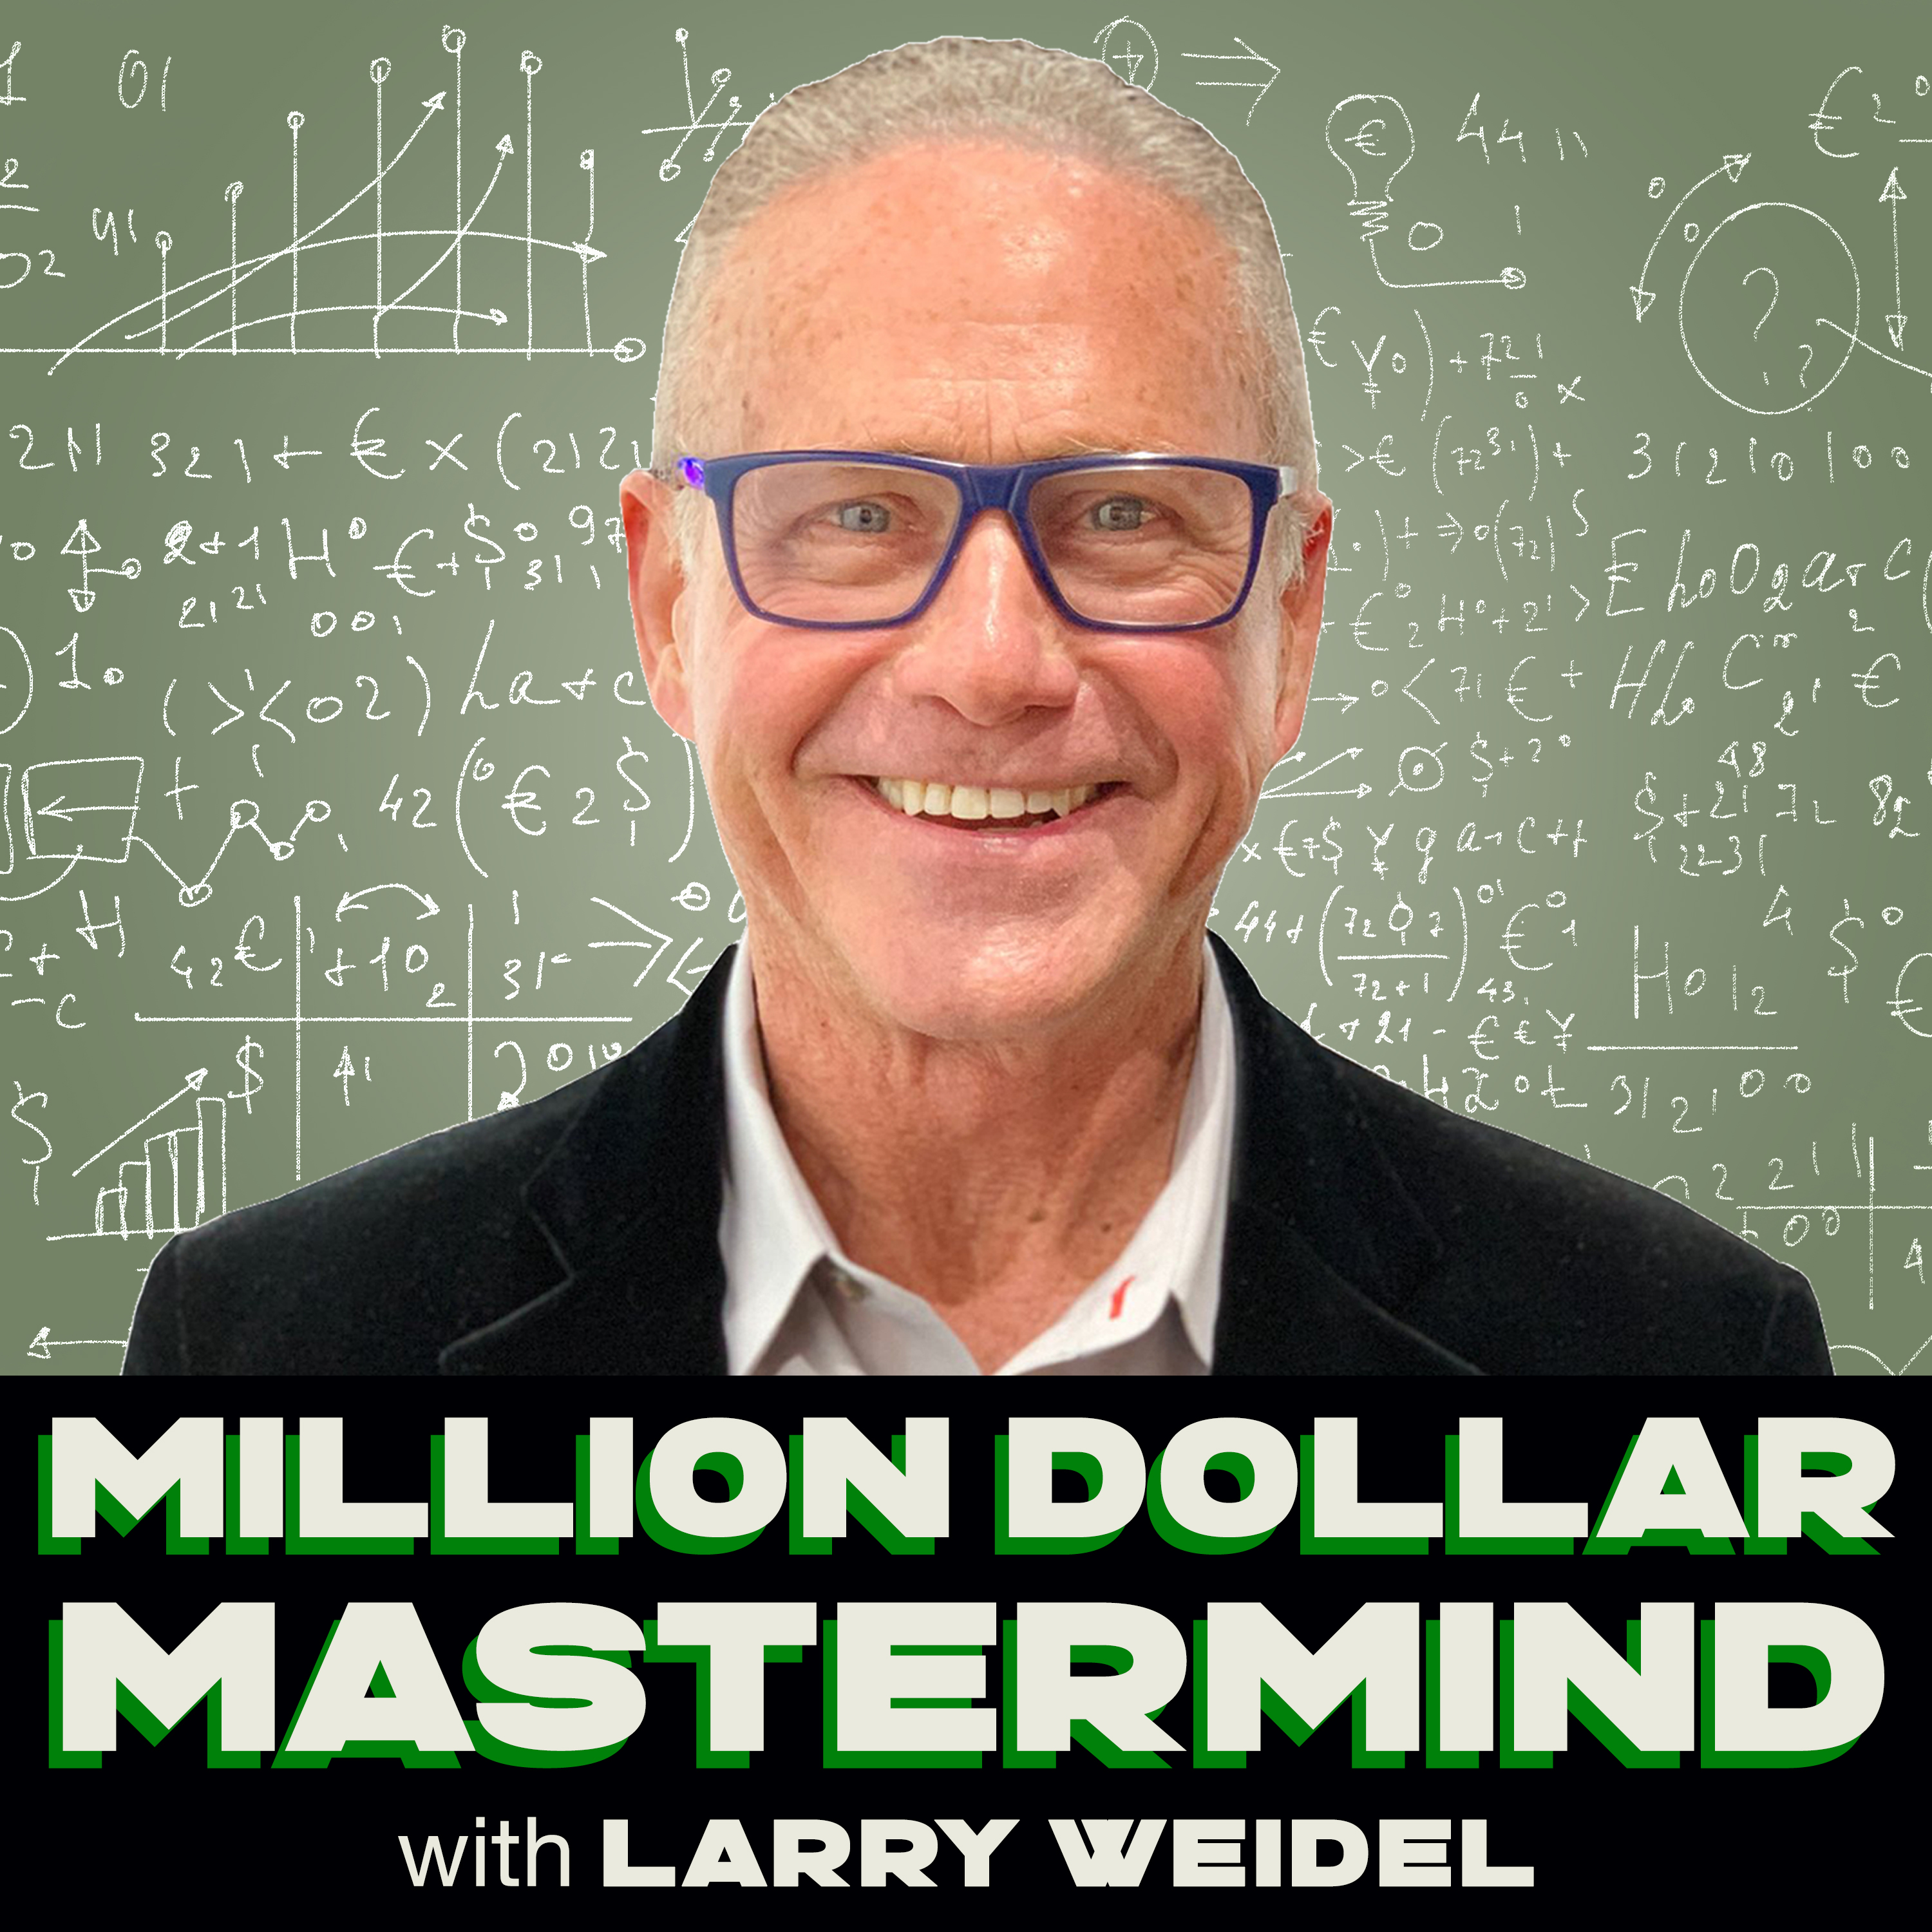 Episode 34: The Only “Top 10” You’ll Ever Need - Larry’s Daily Reflections on Winning